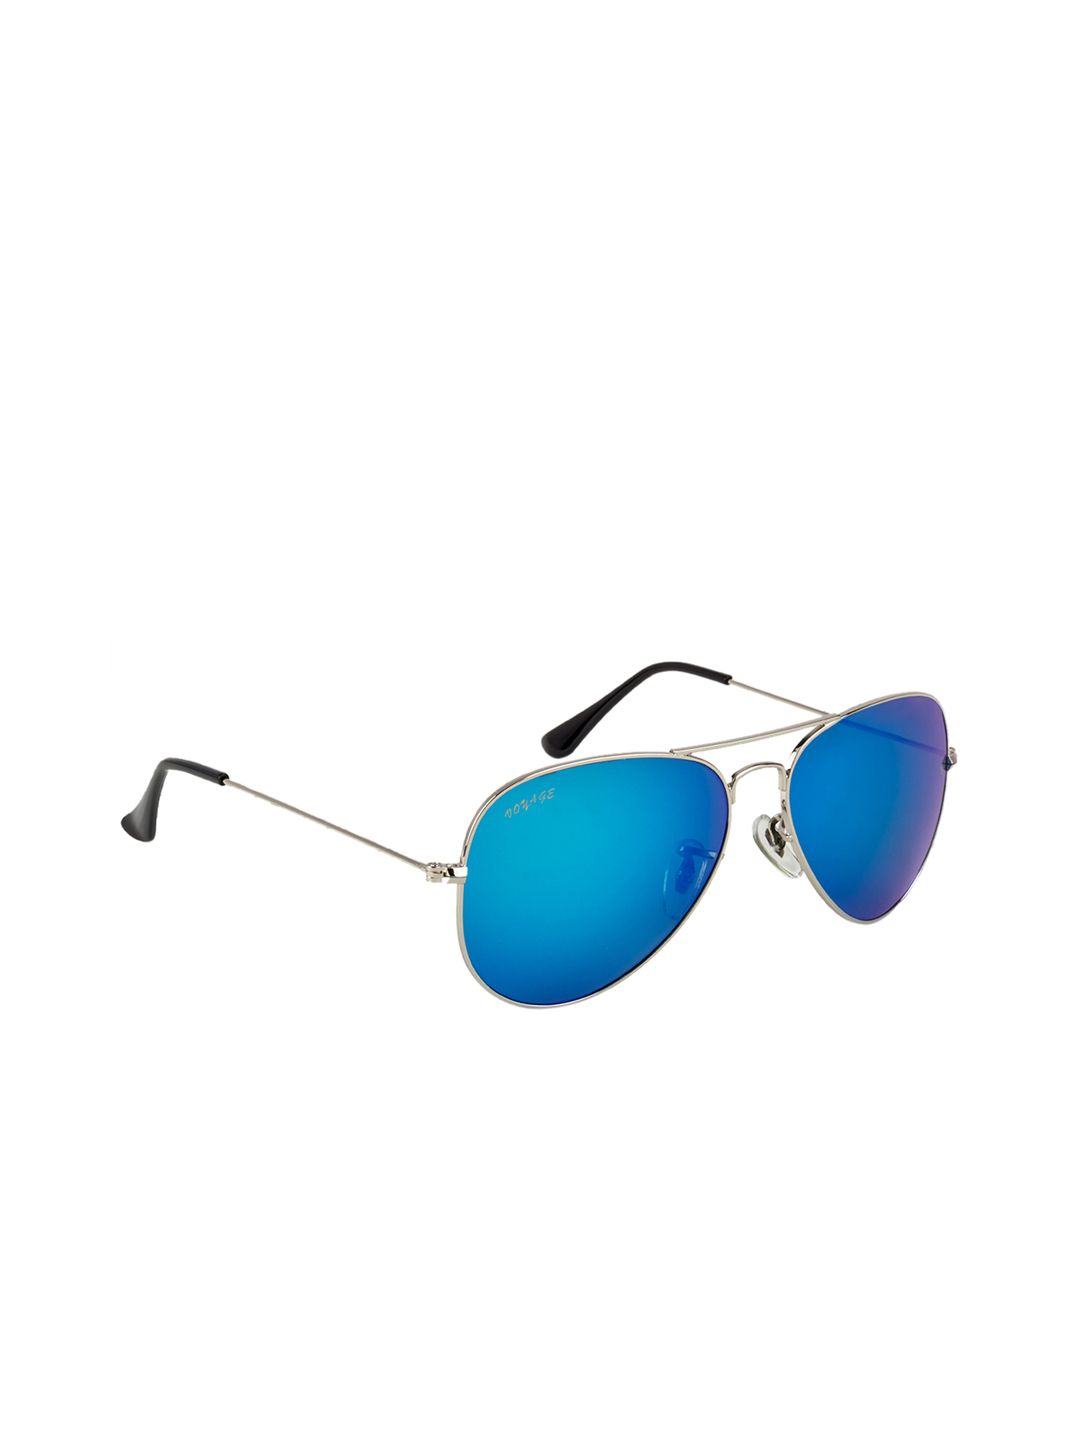 Voyage Unisex Blue & Silver-Toned Aviator Sunglasses 3025MG2369 Price in India